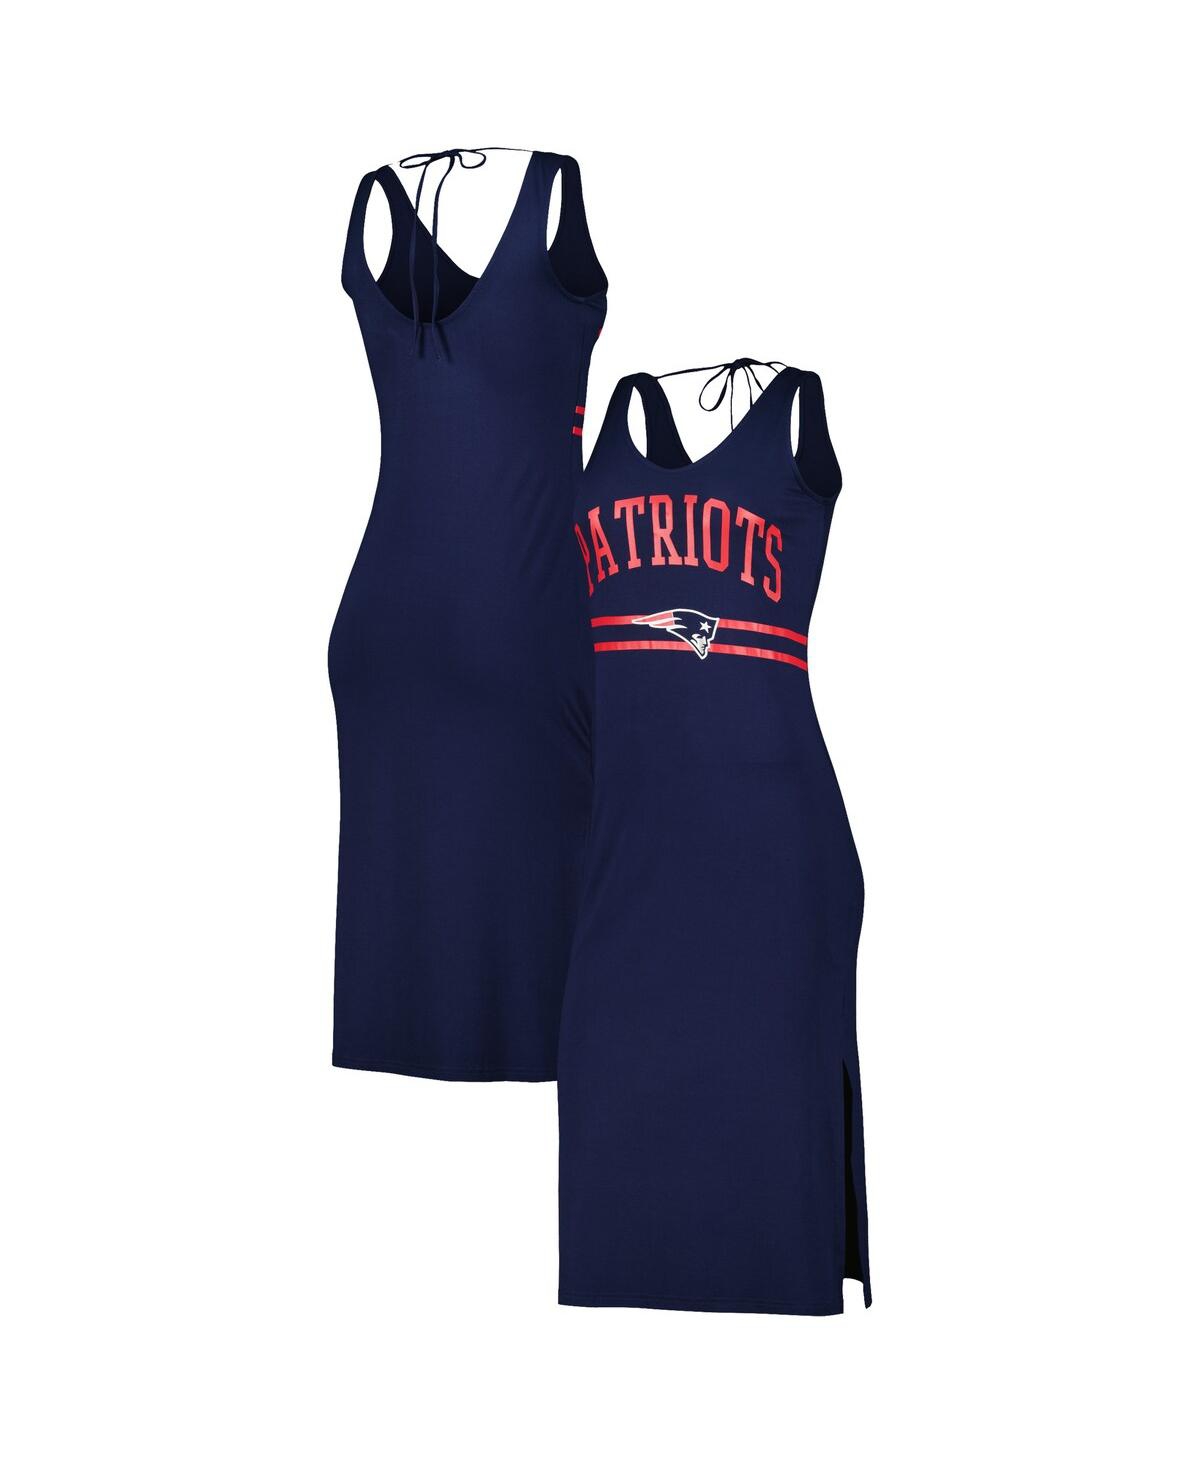 G-III 4HER BY CARL BANKS WOMEN'S G-III 4HER BY CARL BANKS NAVY NEW ENGLAND PATRIOTS TRAINING V-NECK MAXI DRESS